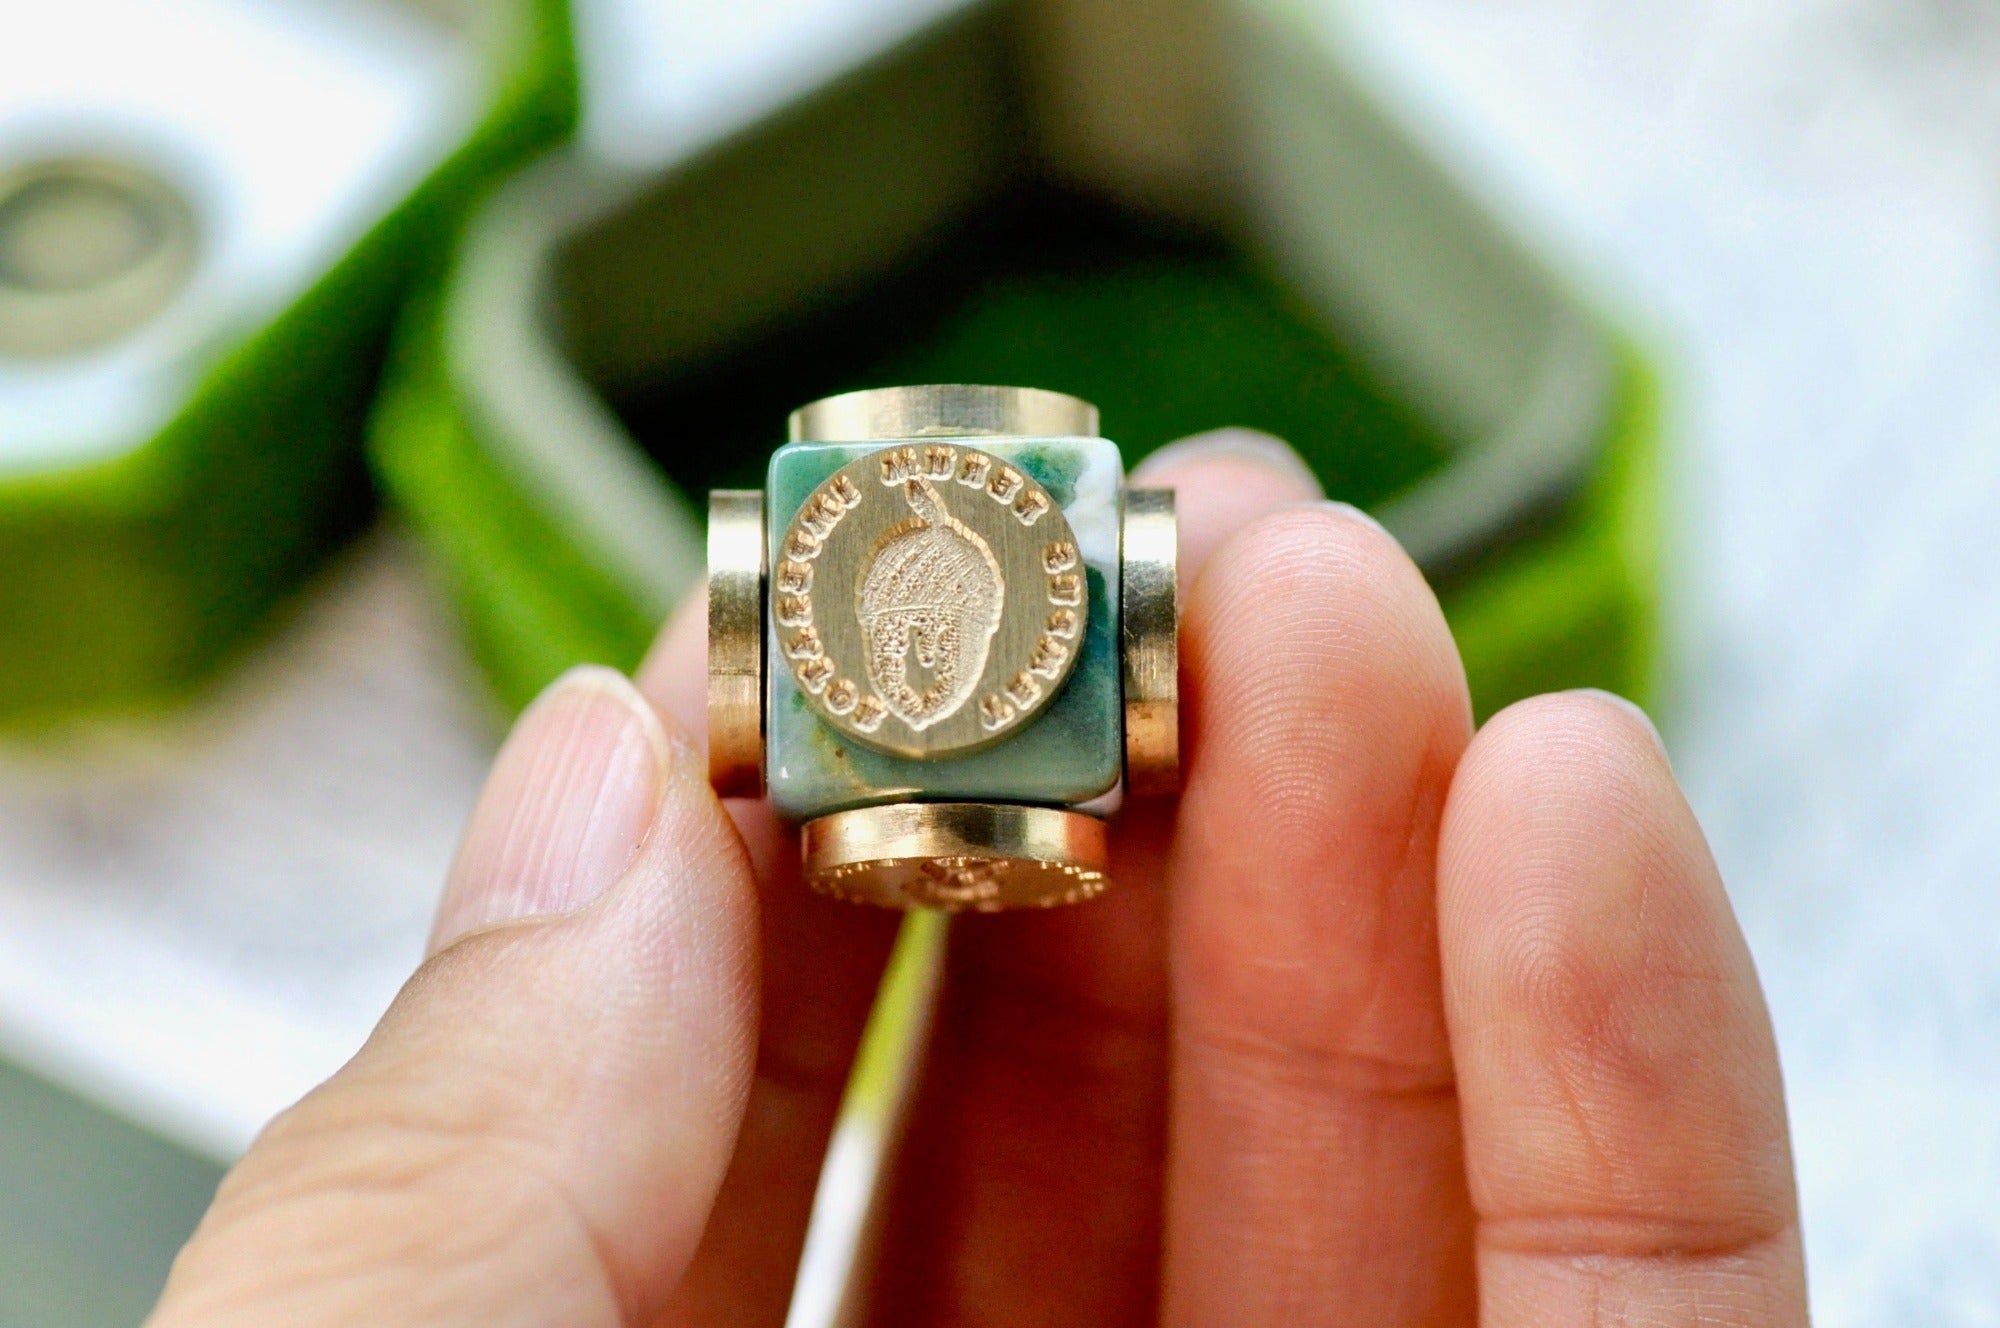 OOAK Latin Motto Cube Wax Seal | Moss Agate | Tomorrow Begins Today - Backtozero B20 - acorn, antique, antique inspired, courage, cube, daisy, hope, latin, latin motto, Message, motto, natural stone, newarrivals, patience, pear, positive, positivity, Retro, rose, stone, time, Tree